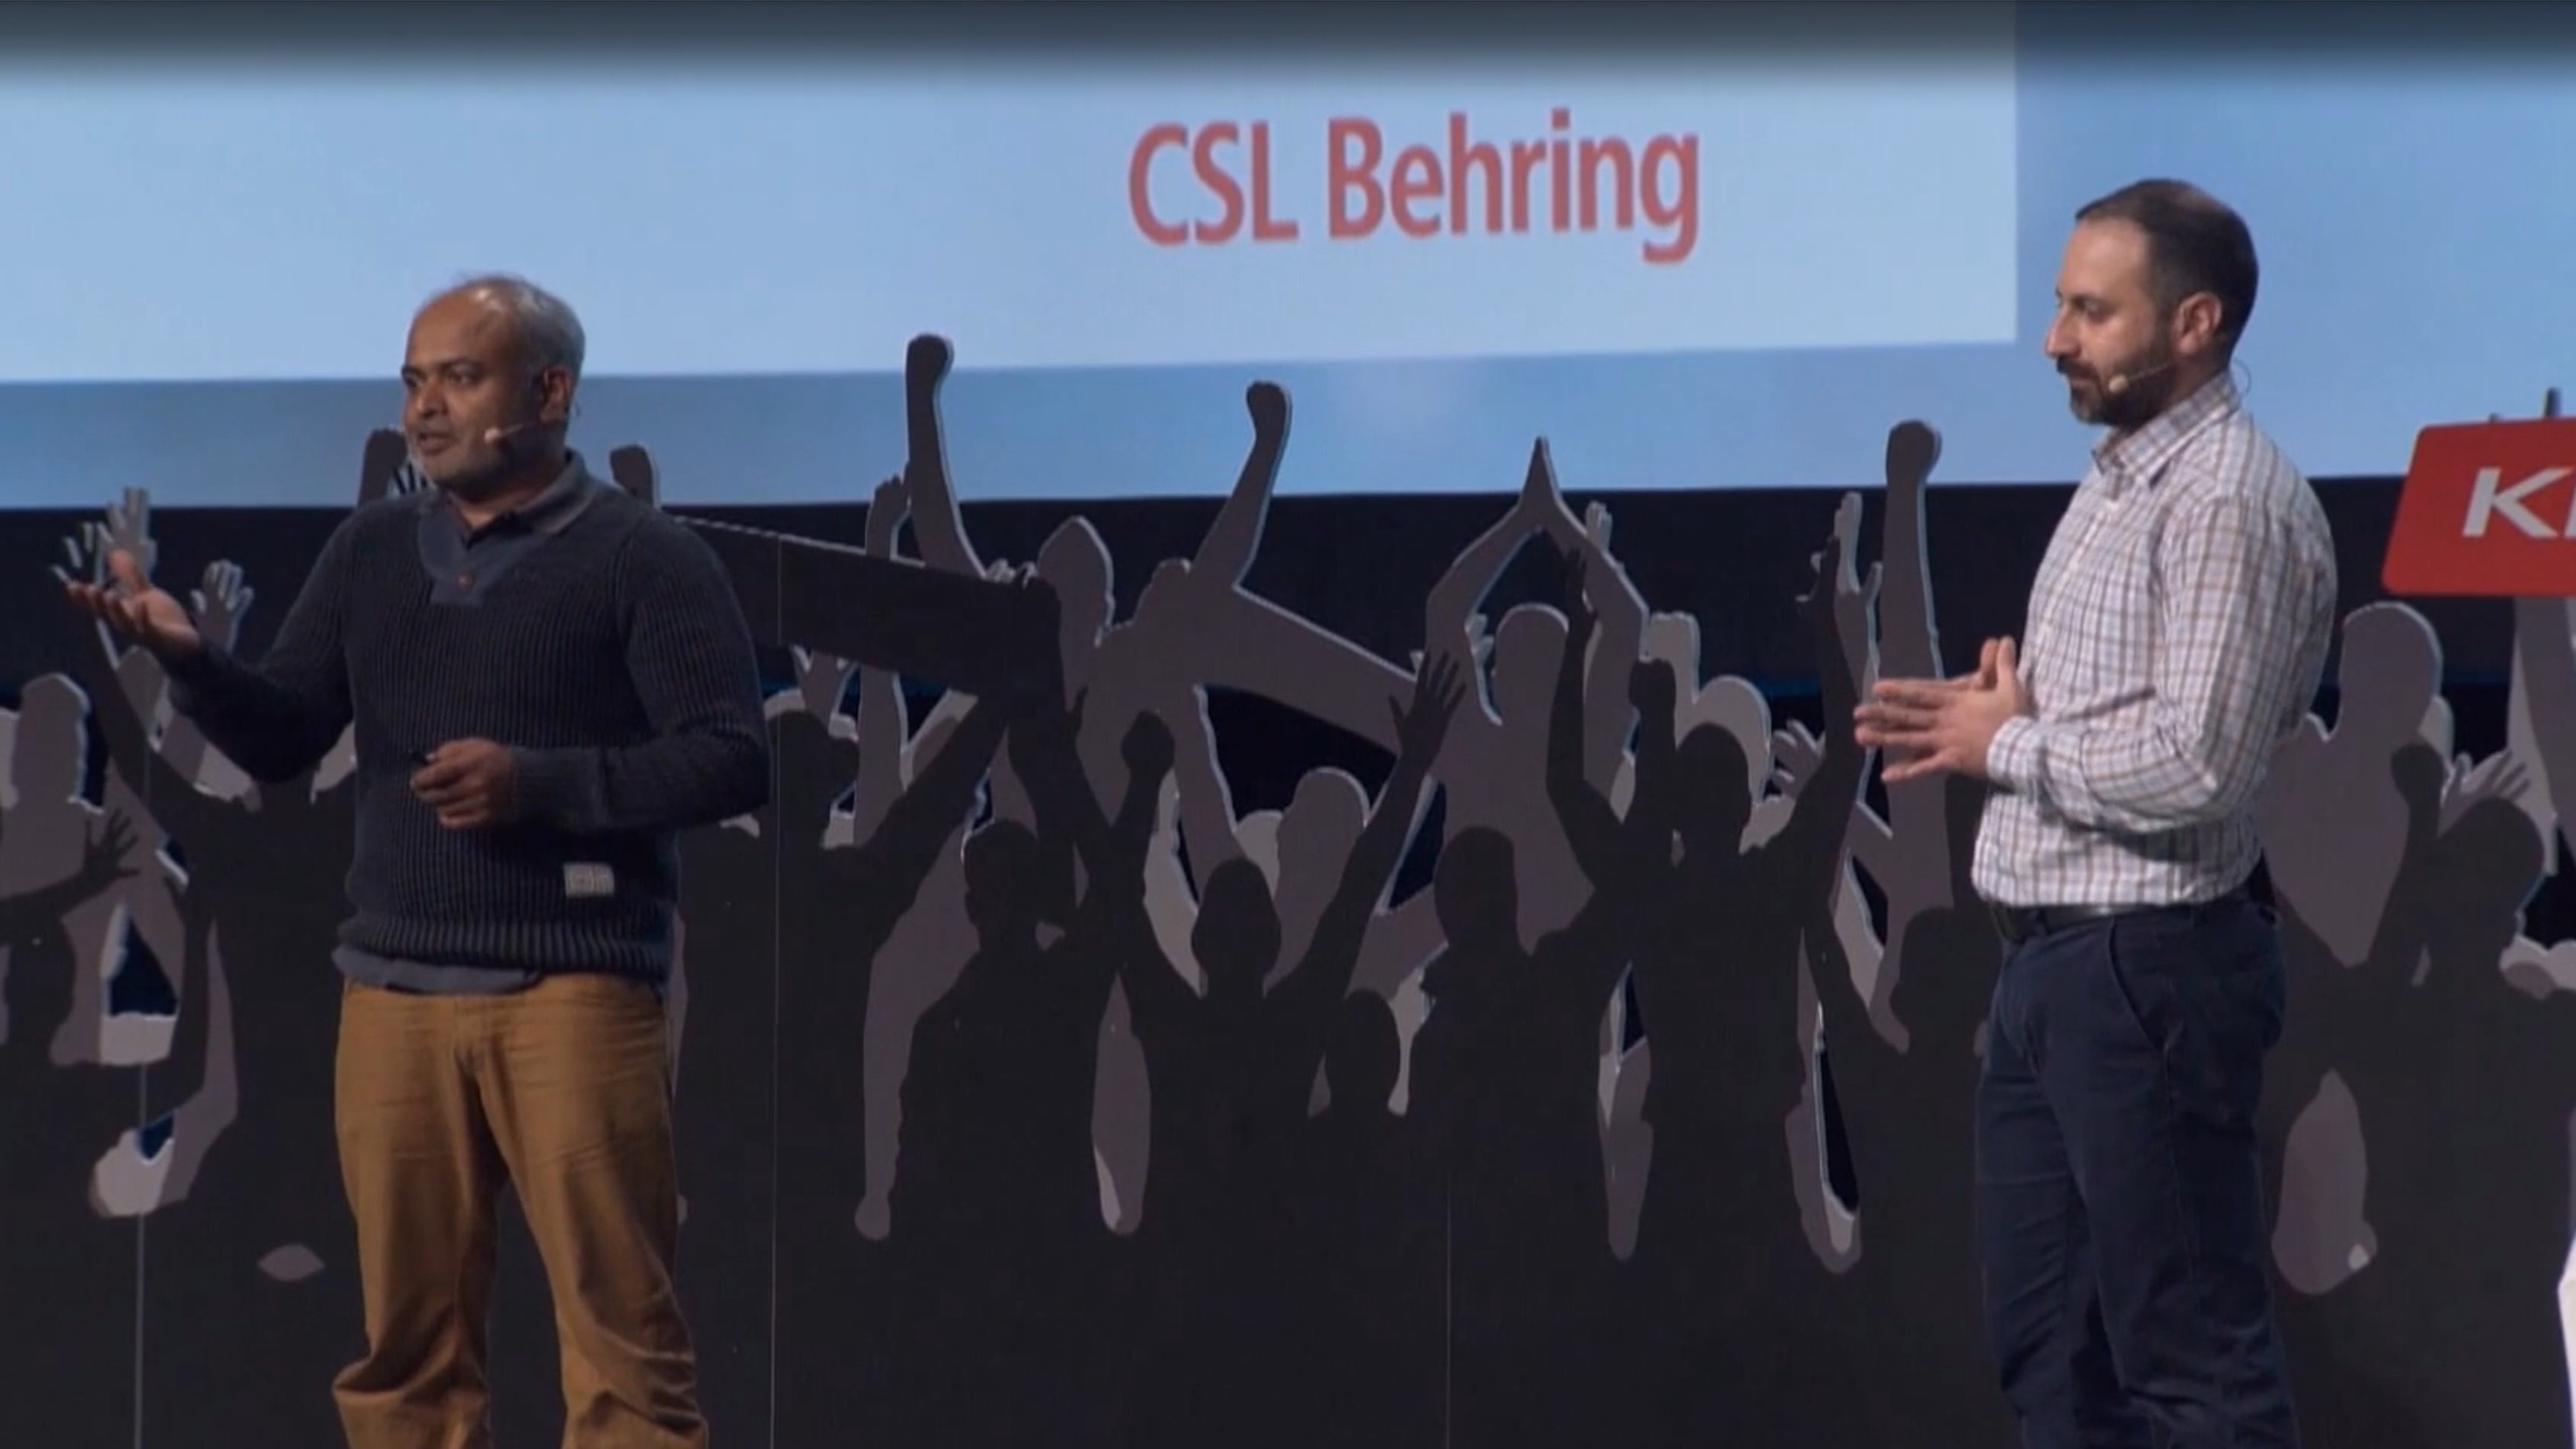 CSL Behring: Improving the collaborative experience